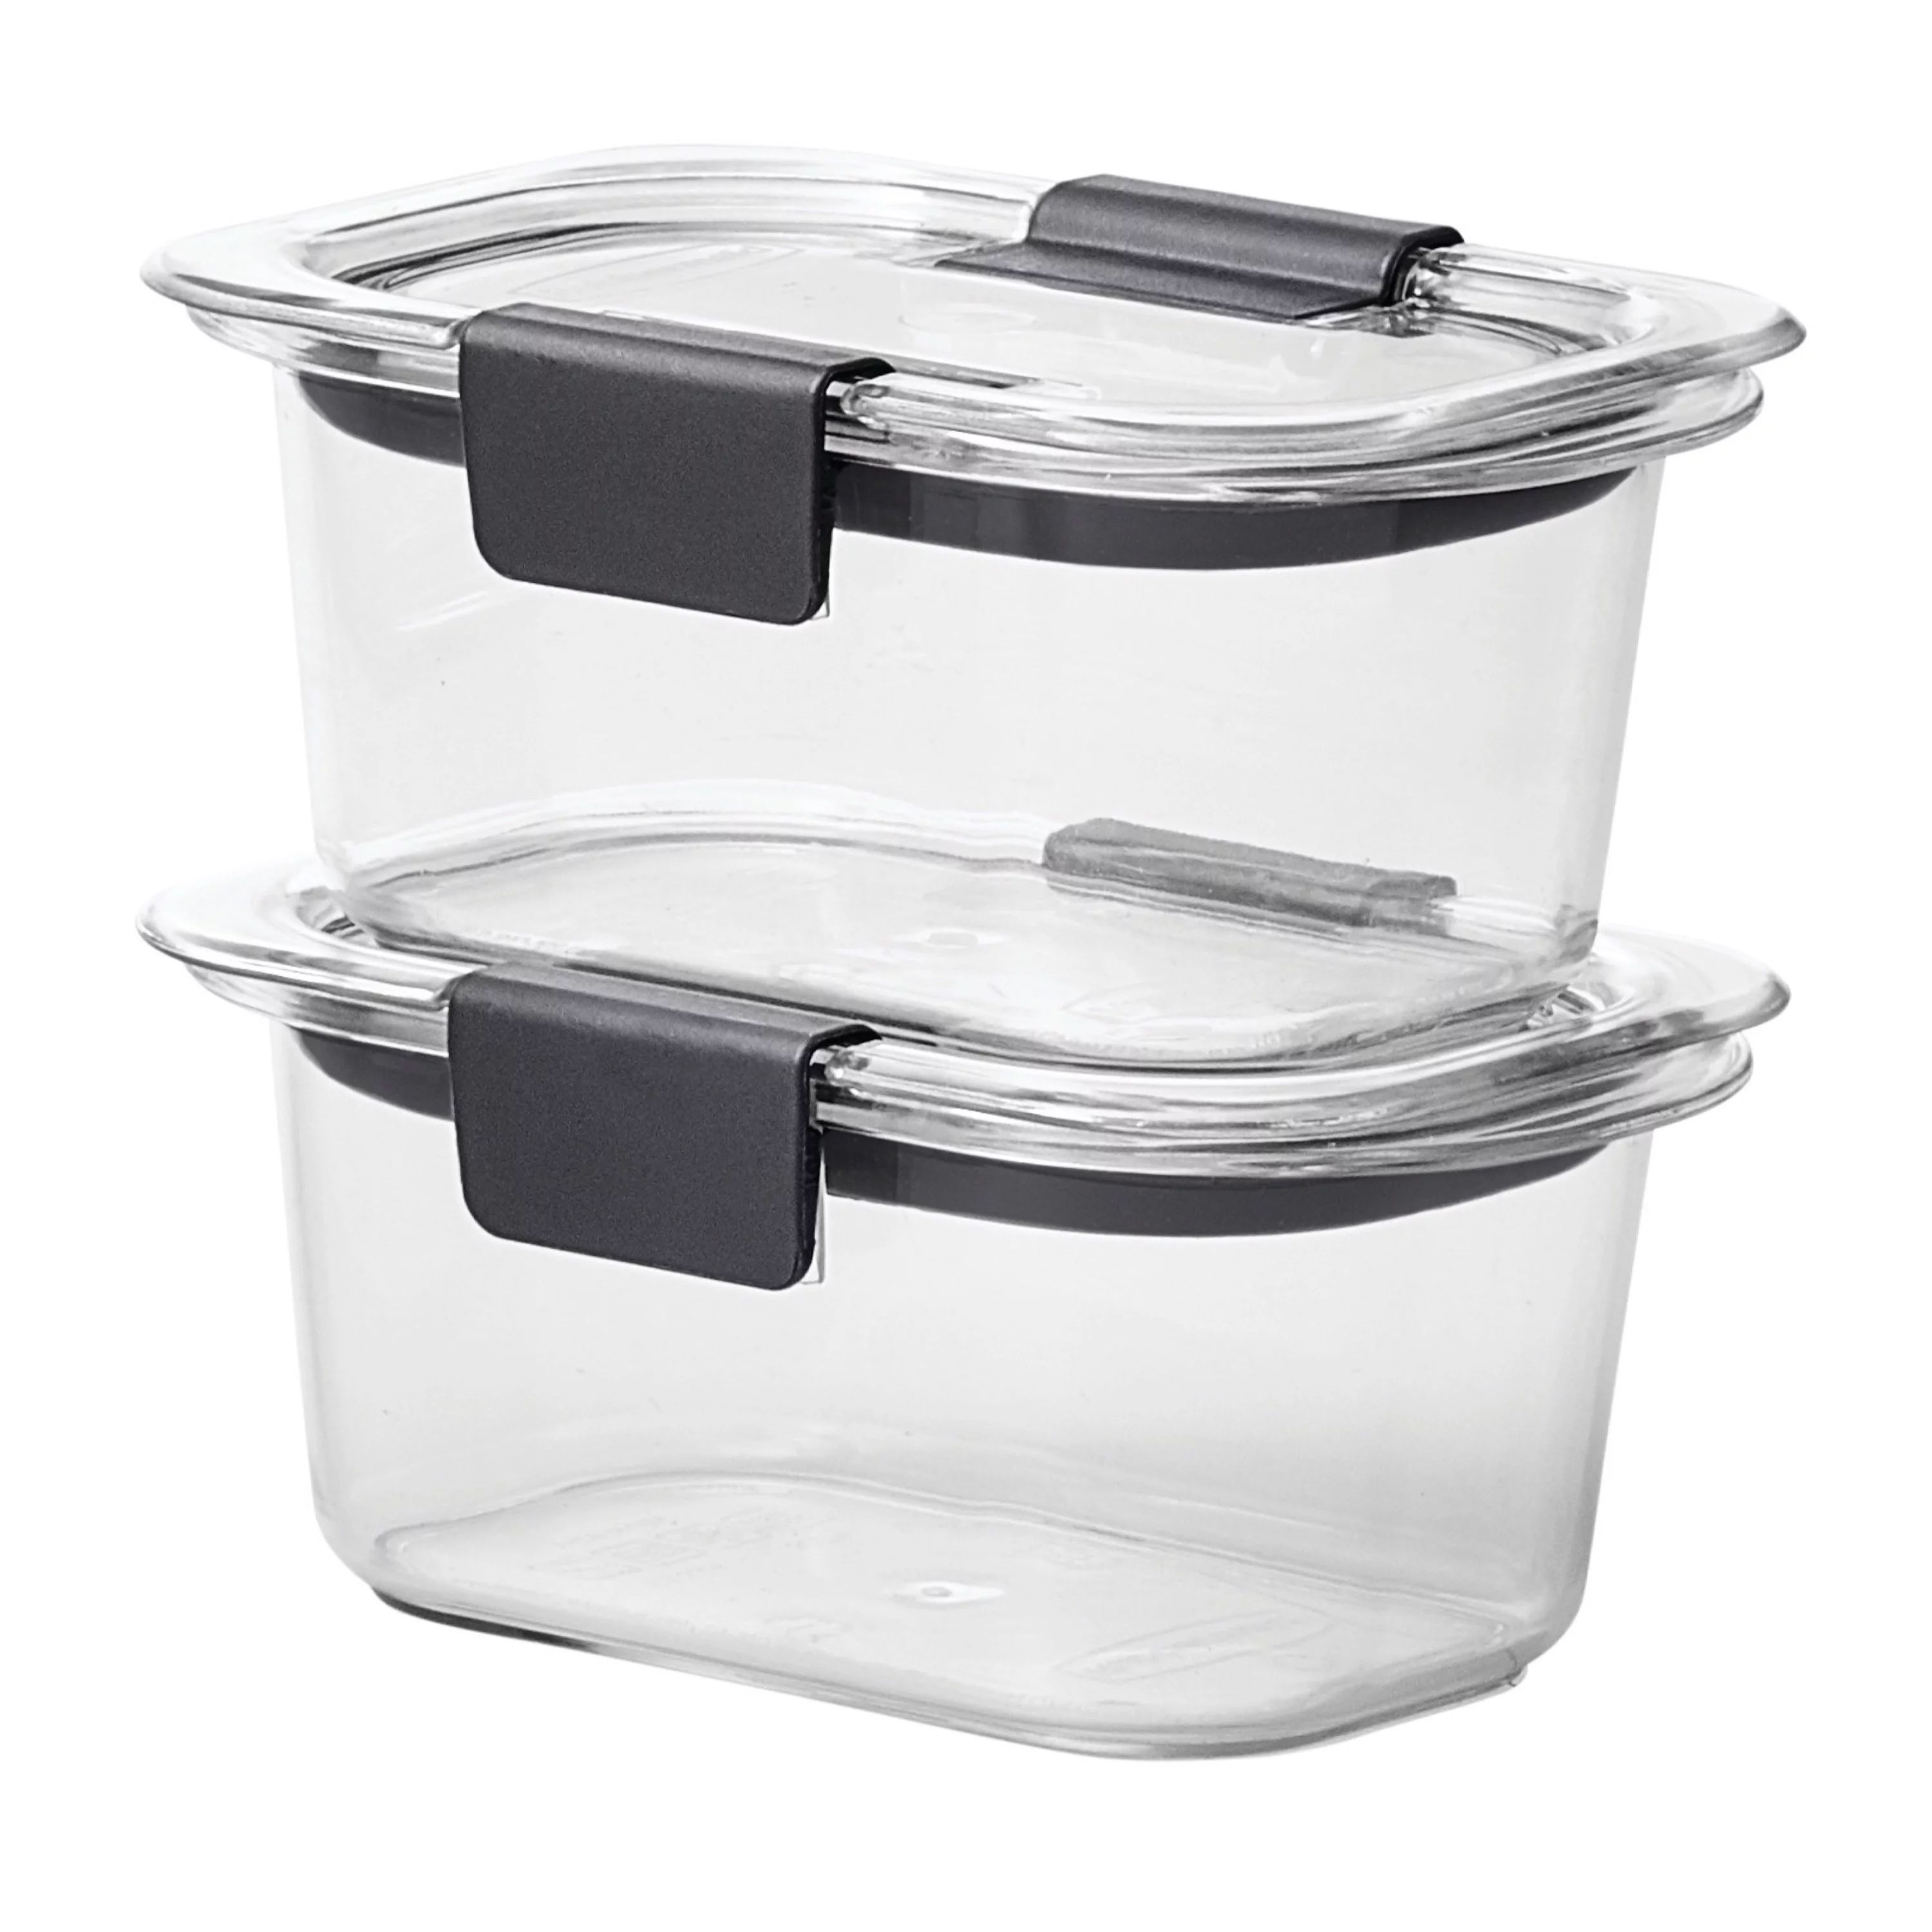 Rubbermaid Brilliance 1.3 Cup Stain-Proof Food Storage Container, Set of 2 | Walmart (US)